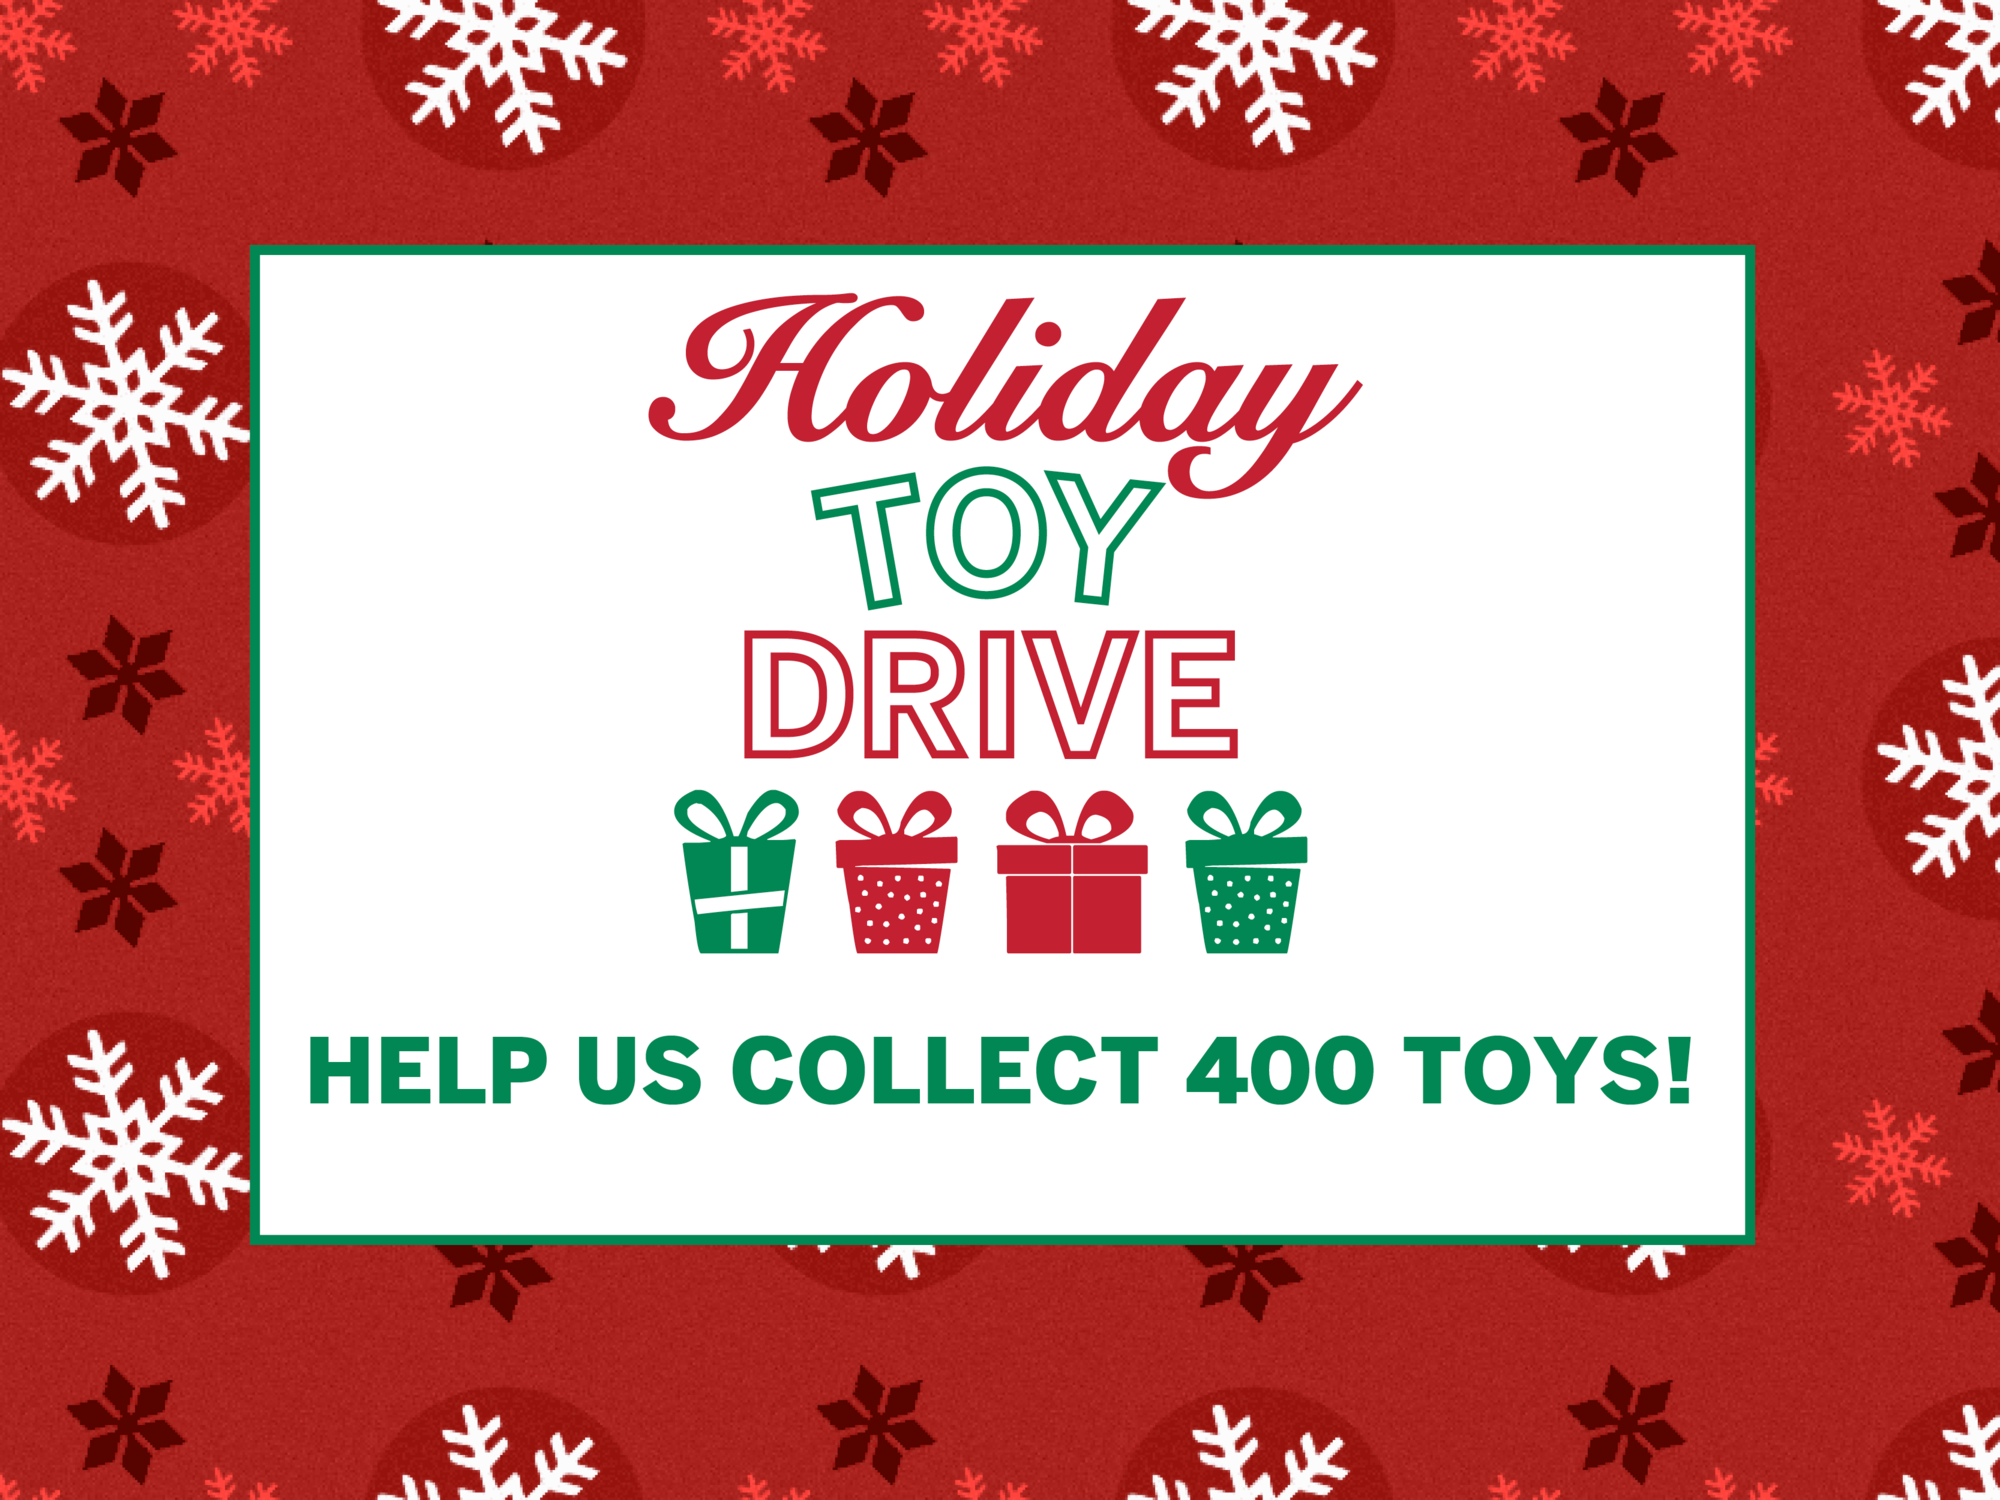 2018 Holiday toy drive